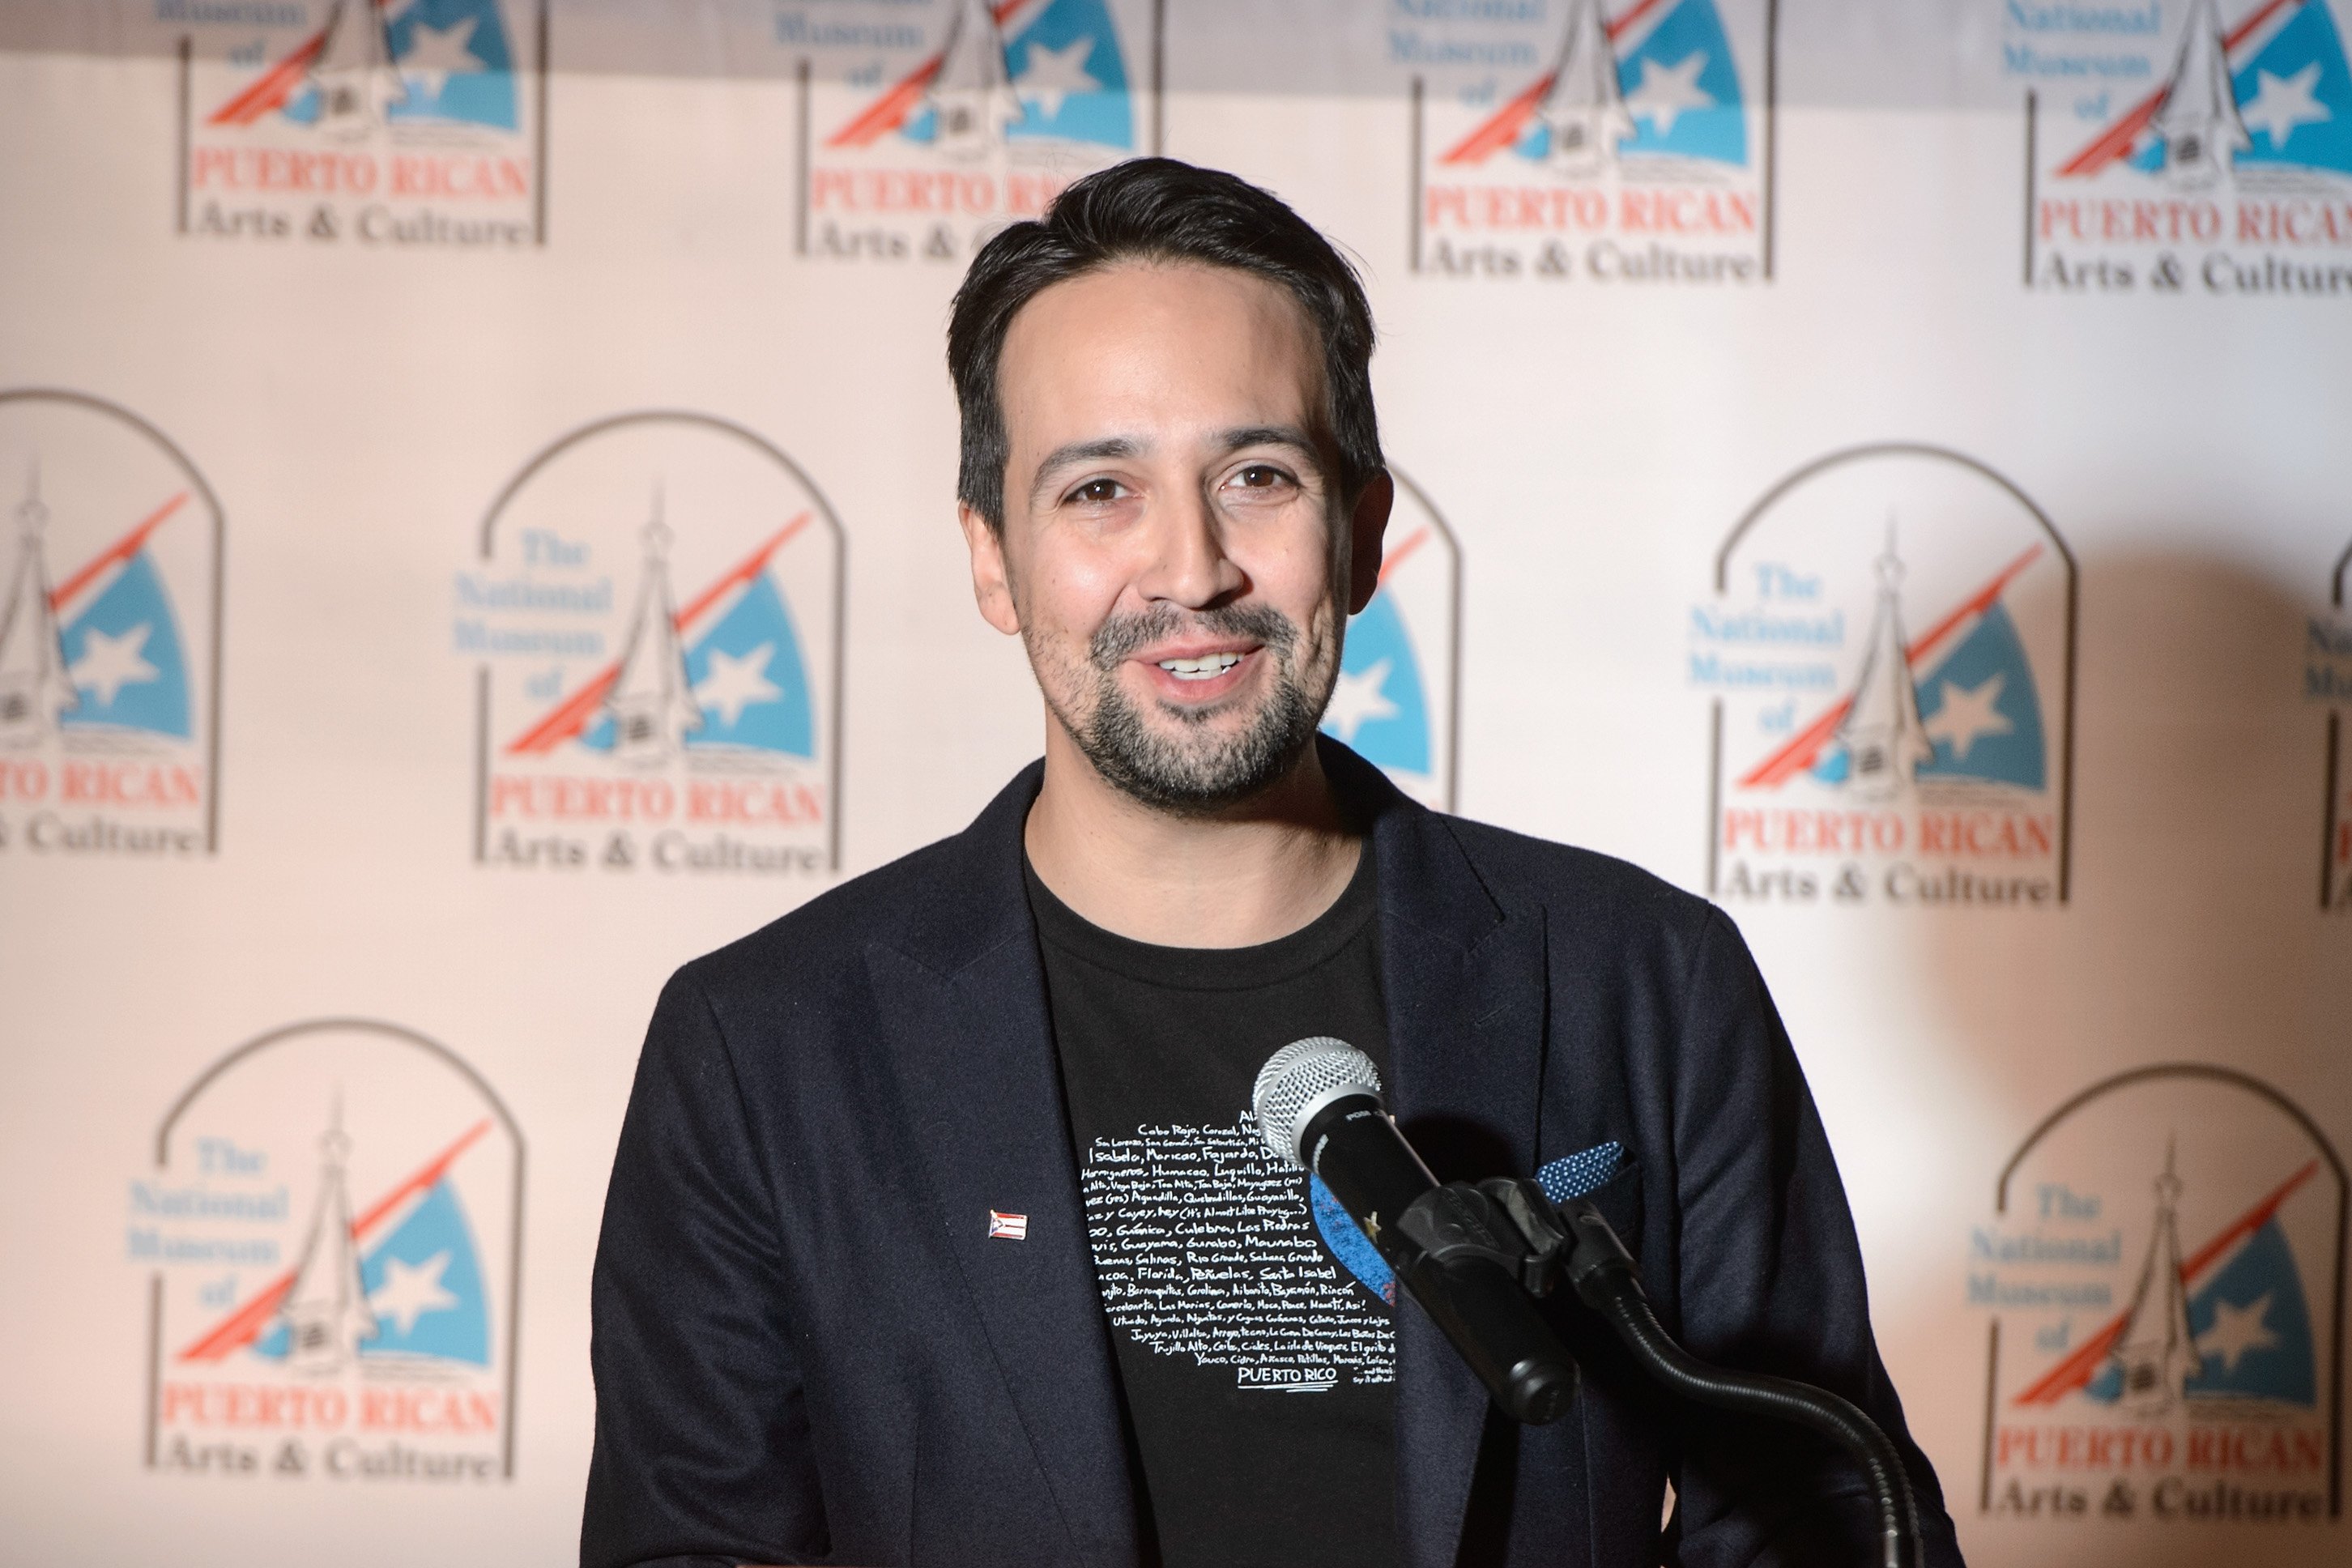 Lin-Manuel Miranda attends a press conference highlighting the needs of Puerto Rico and the impact of Chicago's humanitarian efforts for the island at National Museum Of Puerto Rican Arts &amp; Culture on November 1, 2017 in Chicago, Illinois. (Daniel Boczarski&mdash;Getty Images)